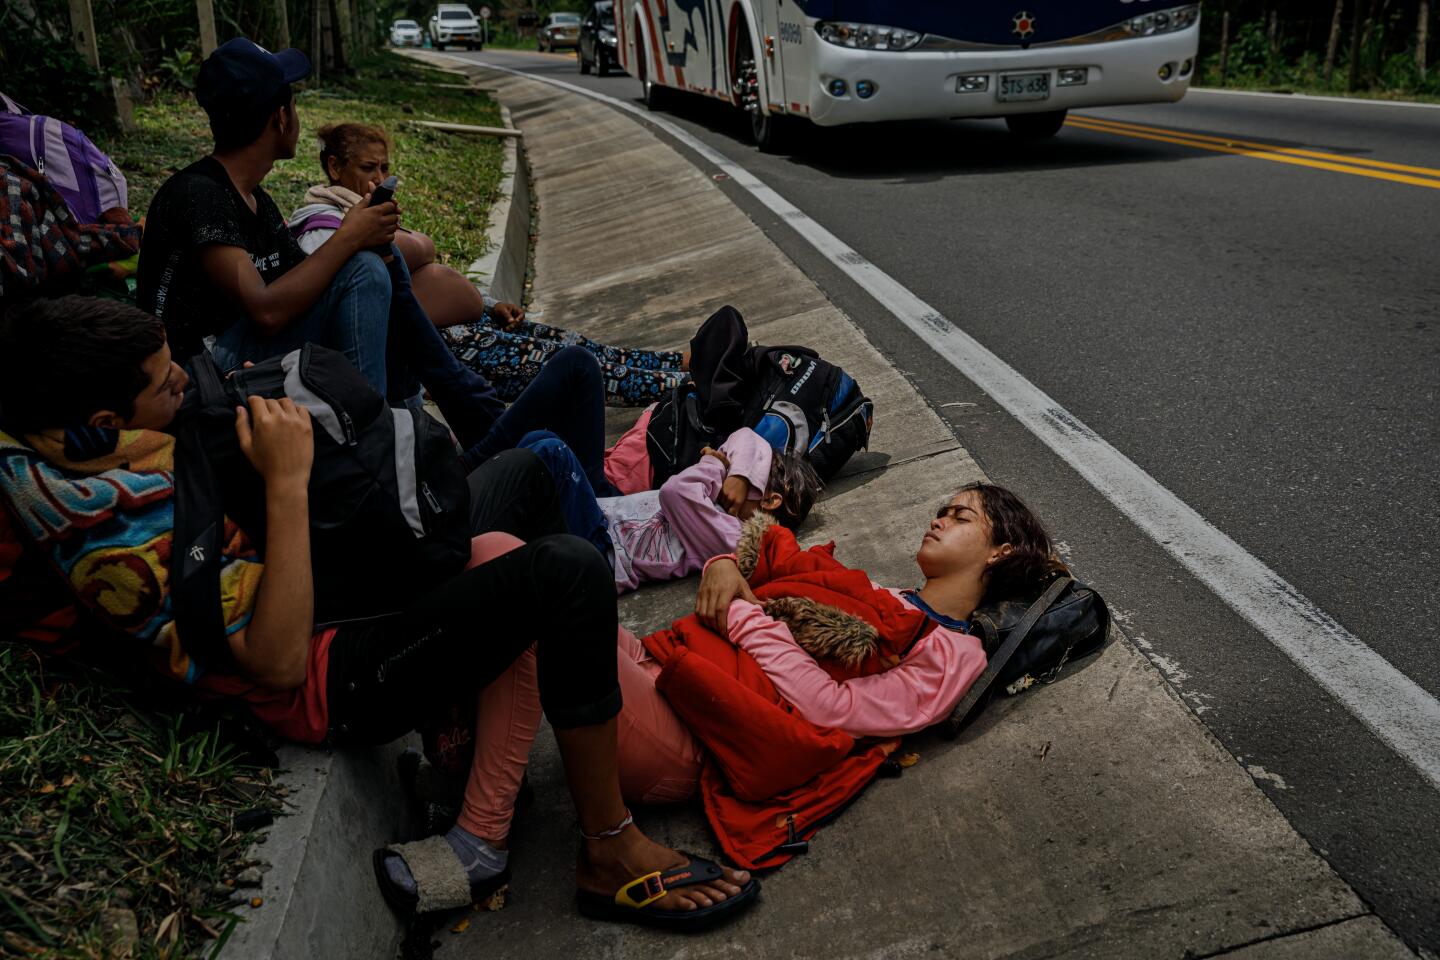 Delimar Fonseca, 18, rests with family and friends on the side of Route 55 near Jimenez, Colombia.